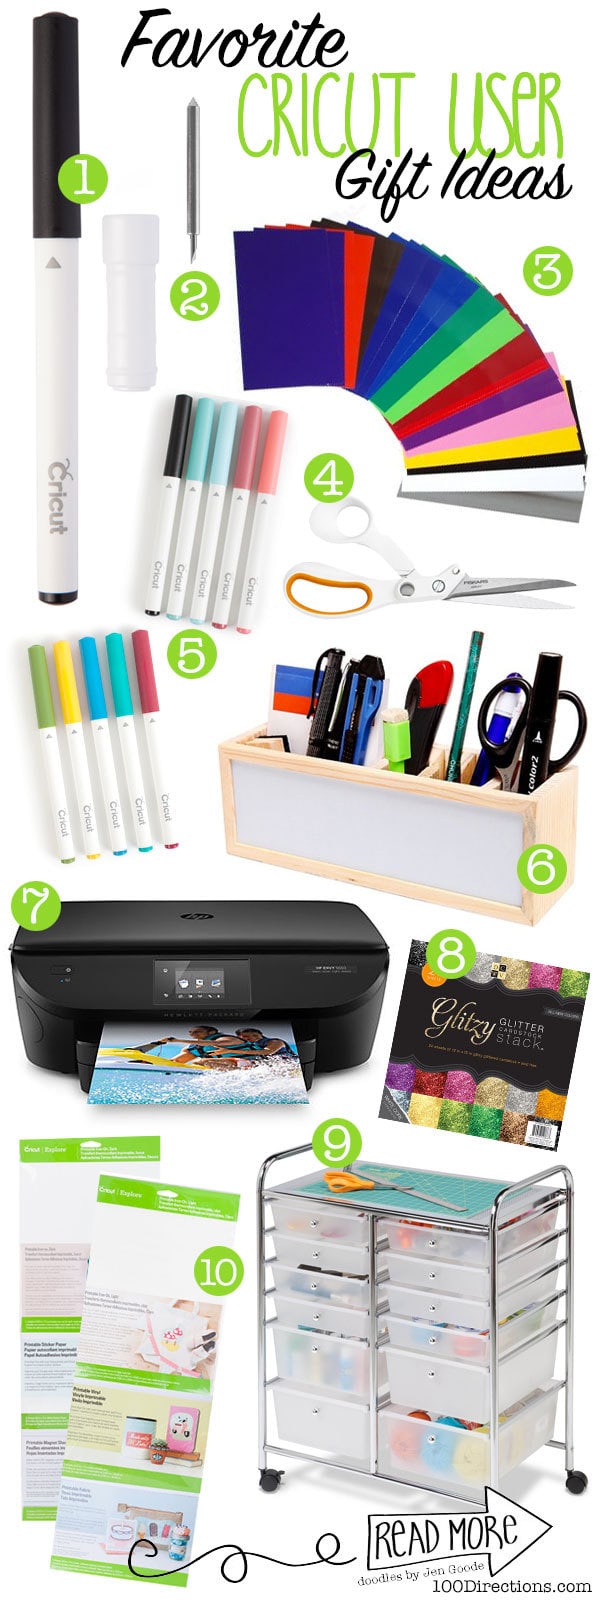 Favorite gift ideas for Cricut Users